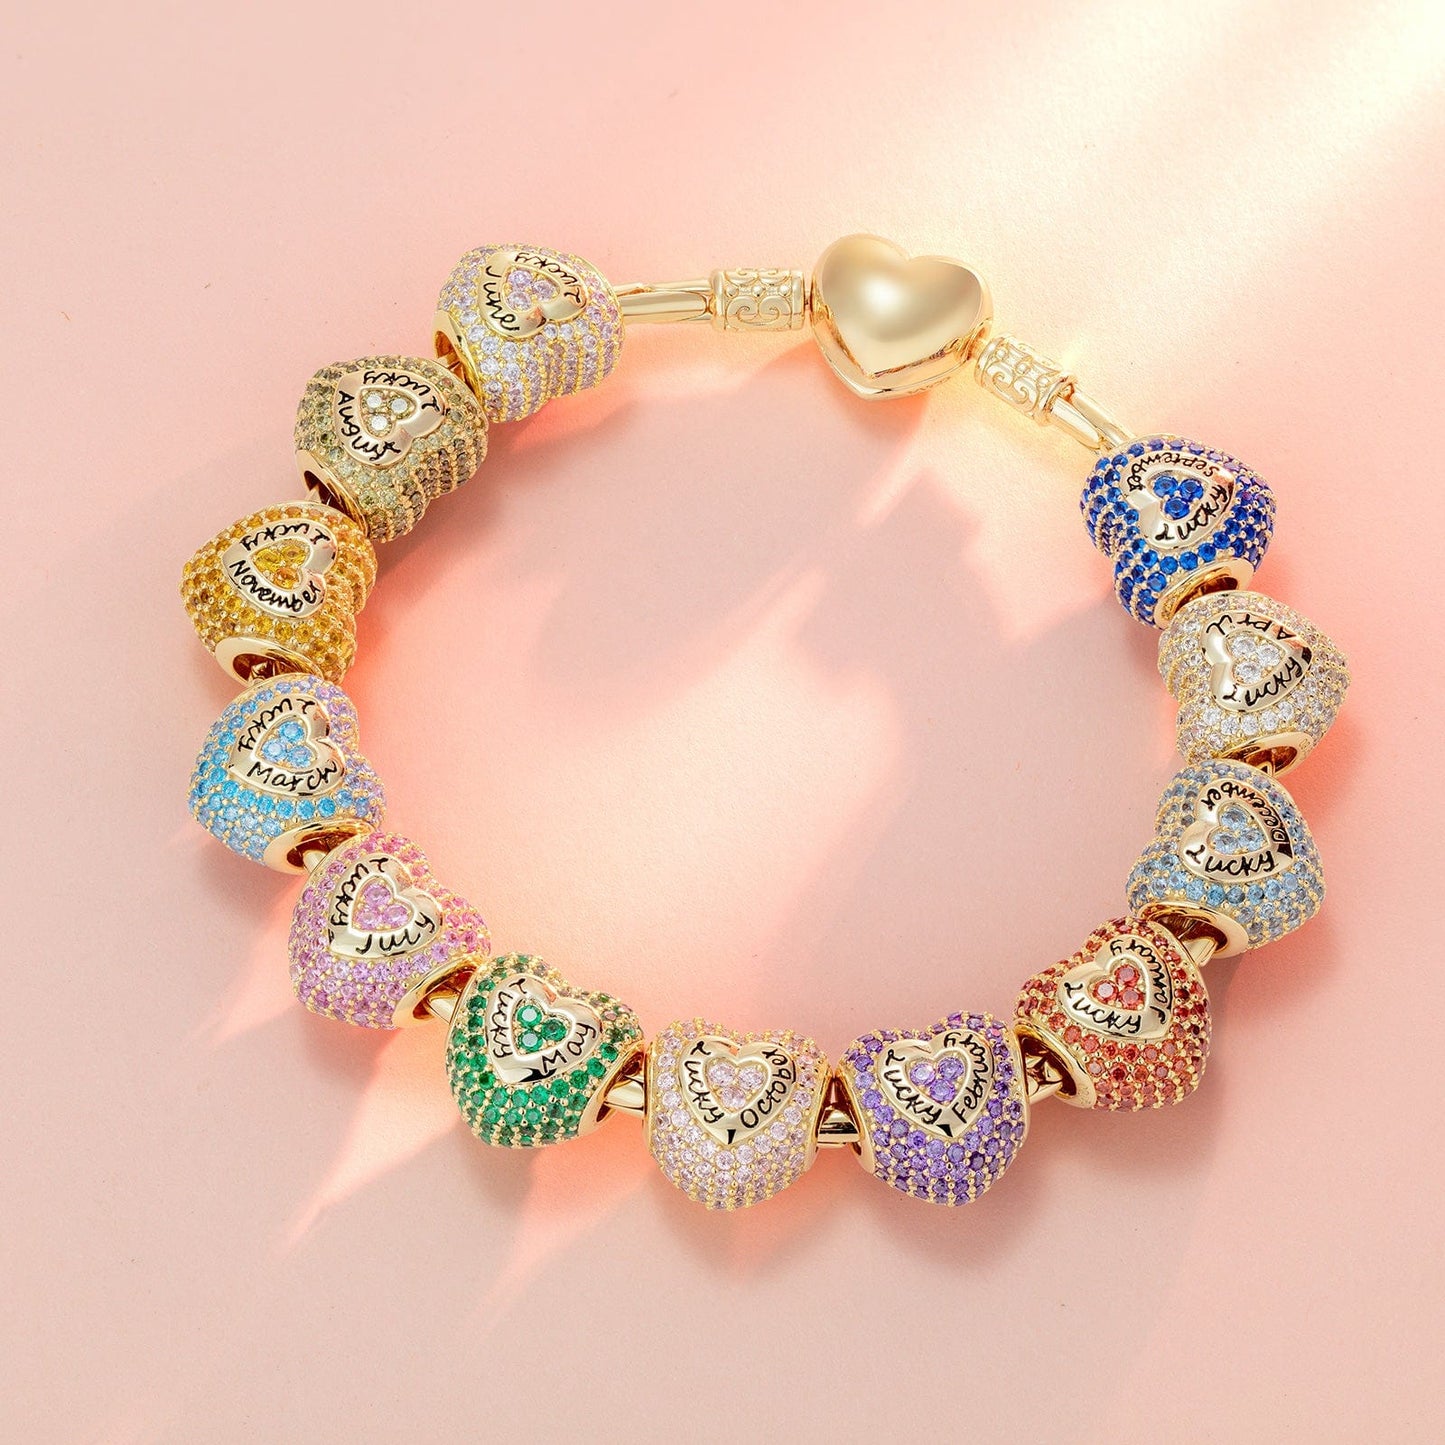 February Love Heart Birthstone Tarnish-resistant Silver Charms With Enamel In 14K Gold Plated